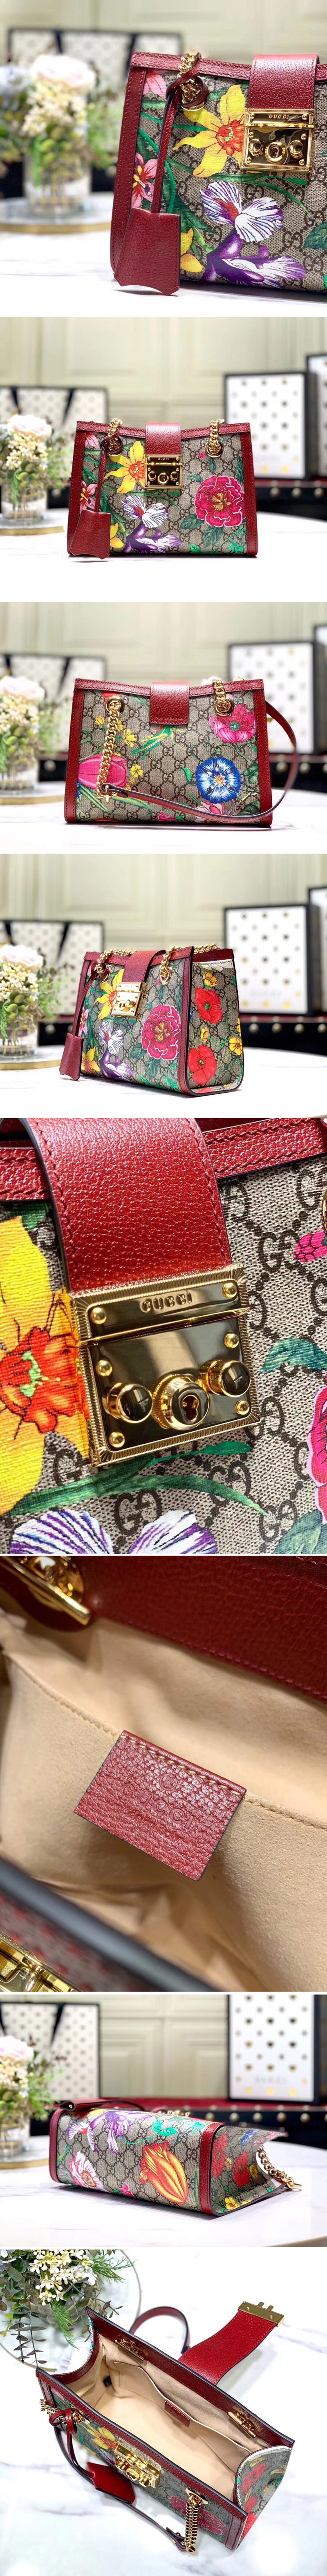 Replica Gucci 498156 Padlock GG Flora small shoulder bags Beige/ebony GG Supreme canvas With Red leather